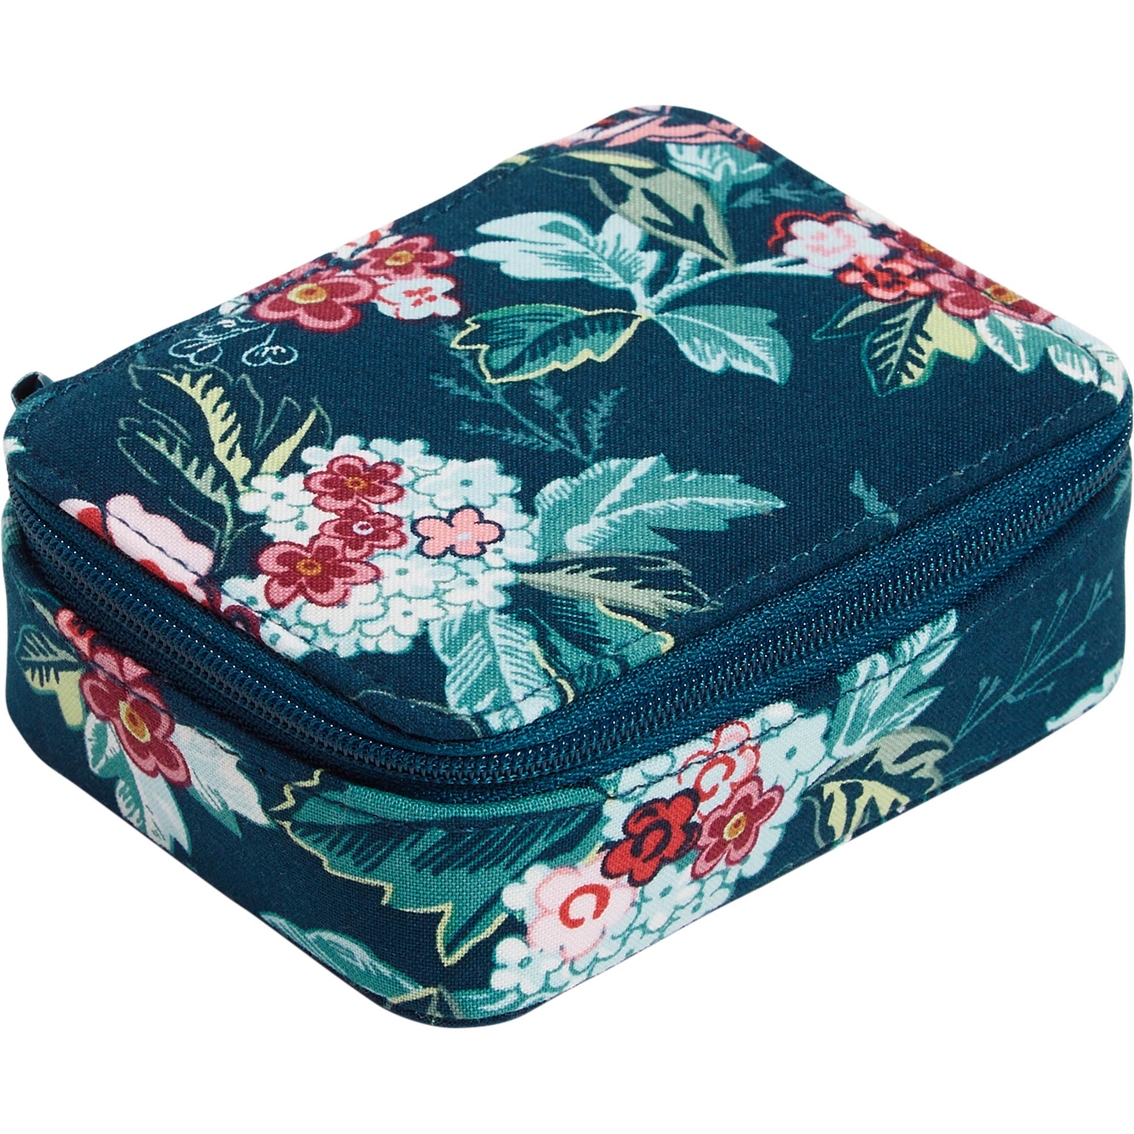 Vera Bradley Rose Toile Travel Pill Case | Safety & Mobility Aids ...